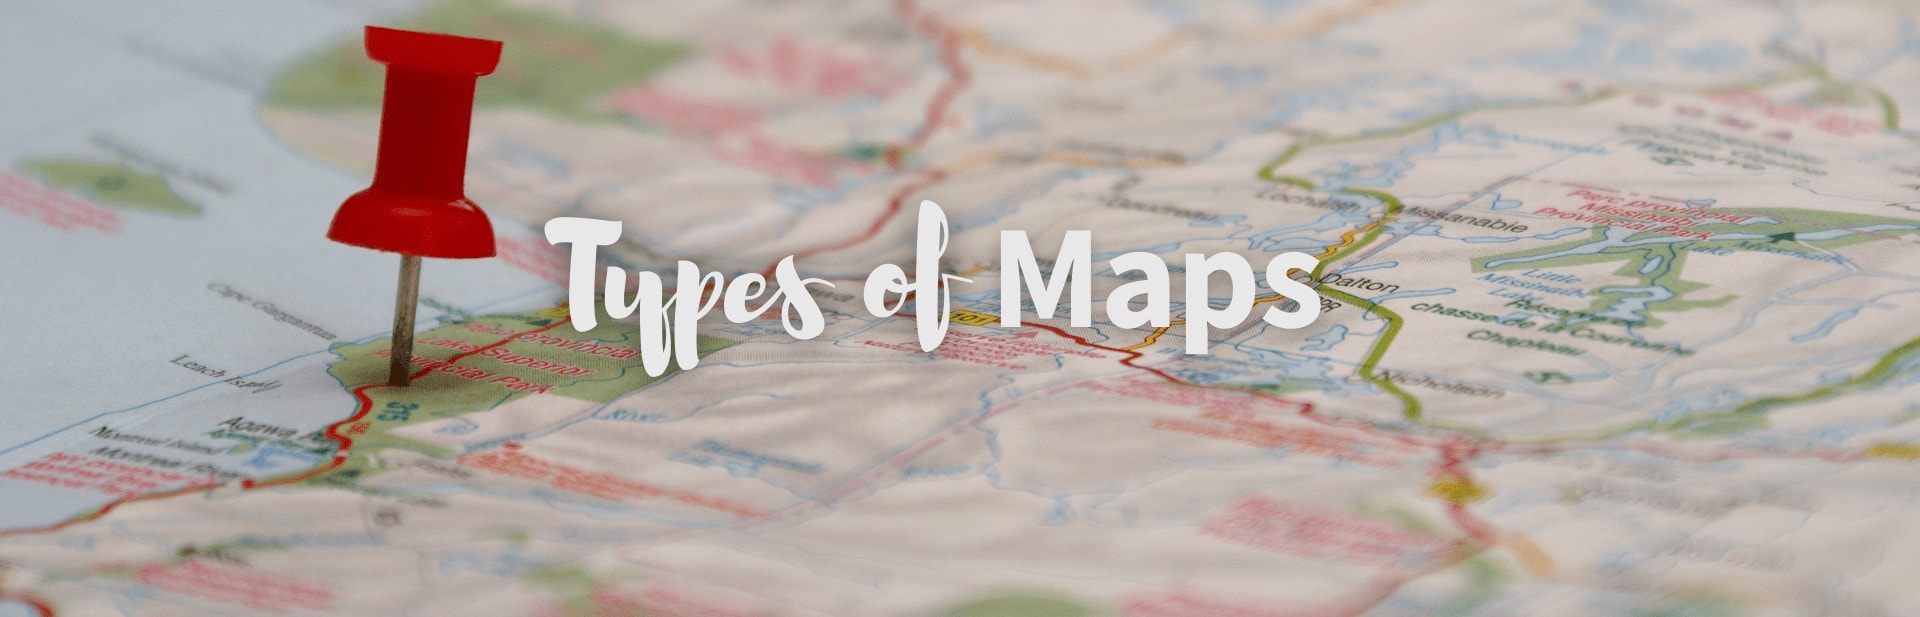 5 Primary Types of Maps Through the Ages (Pictures, History & Charts)